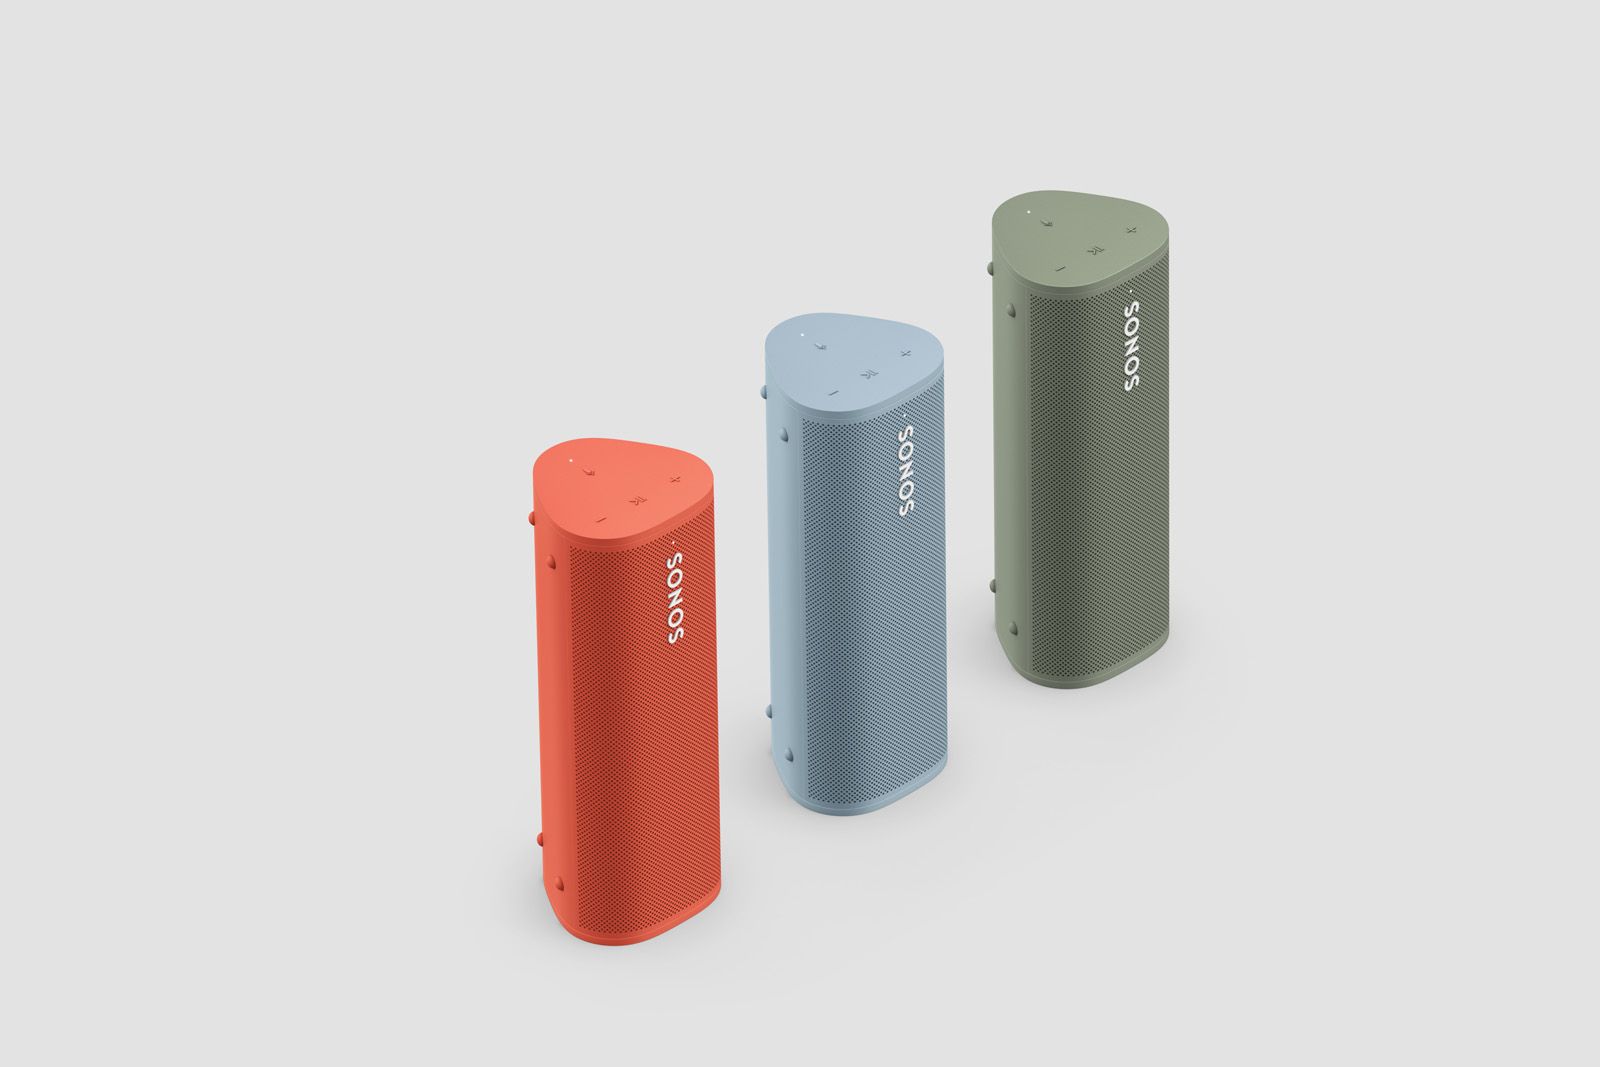 Sonos Roam launches in three new colours photo 1